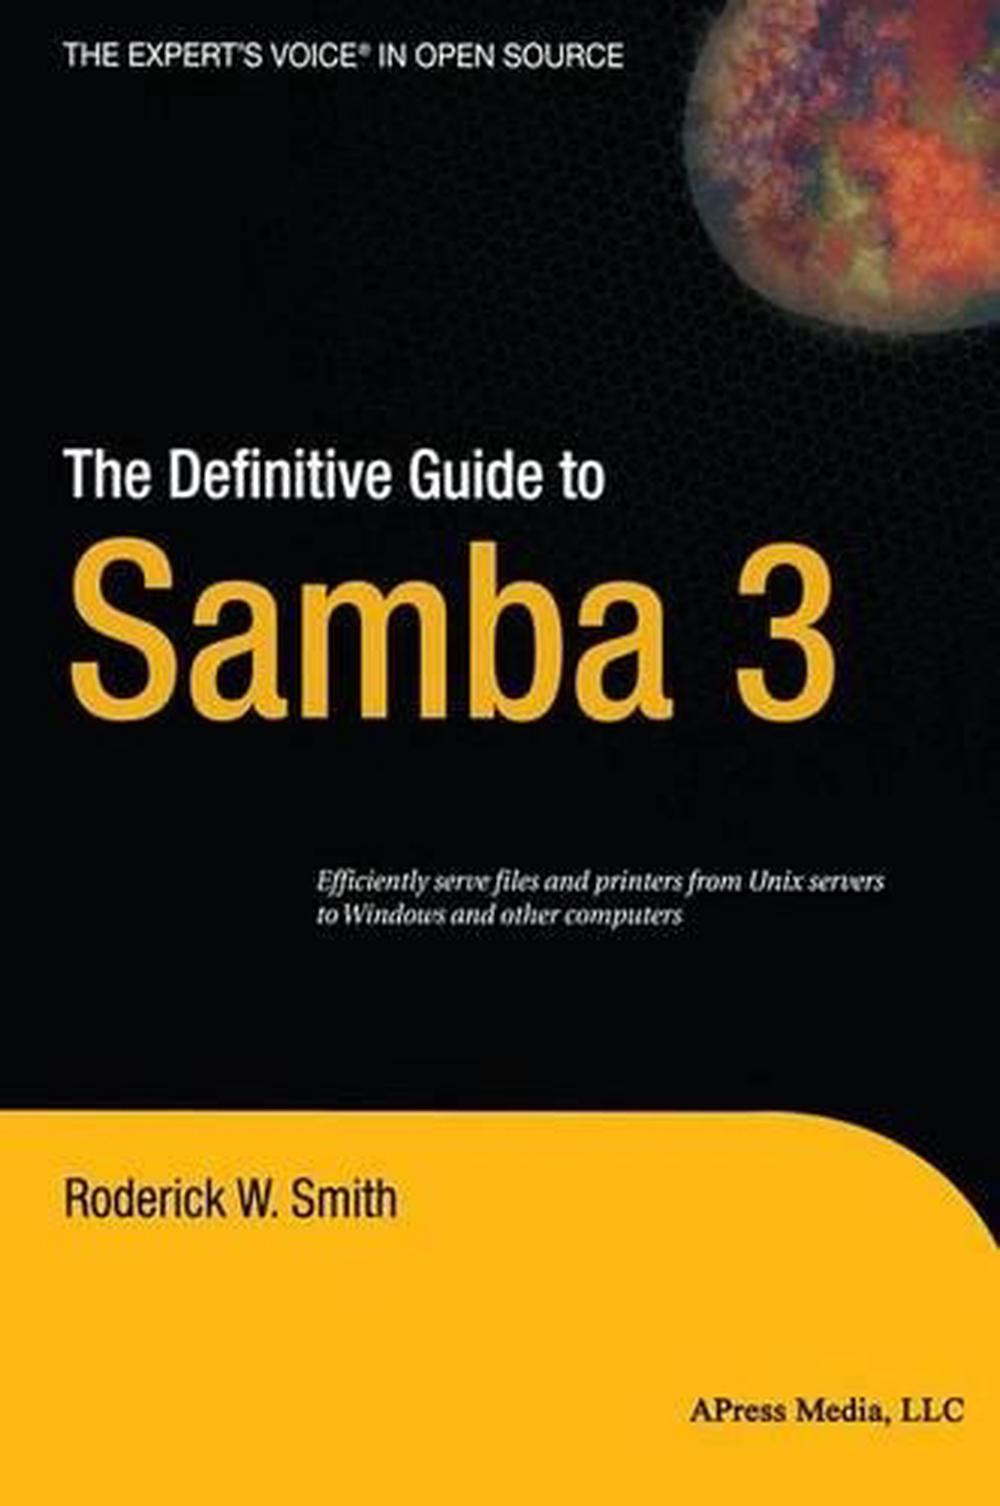 The Definitive Guide to Samba 3 by Roderick W. Smith (English